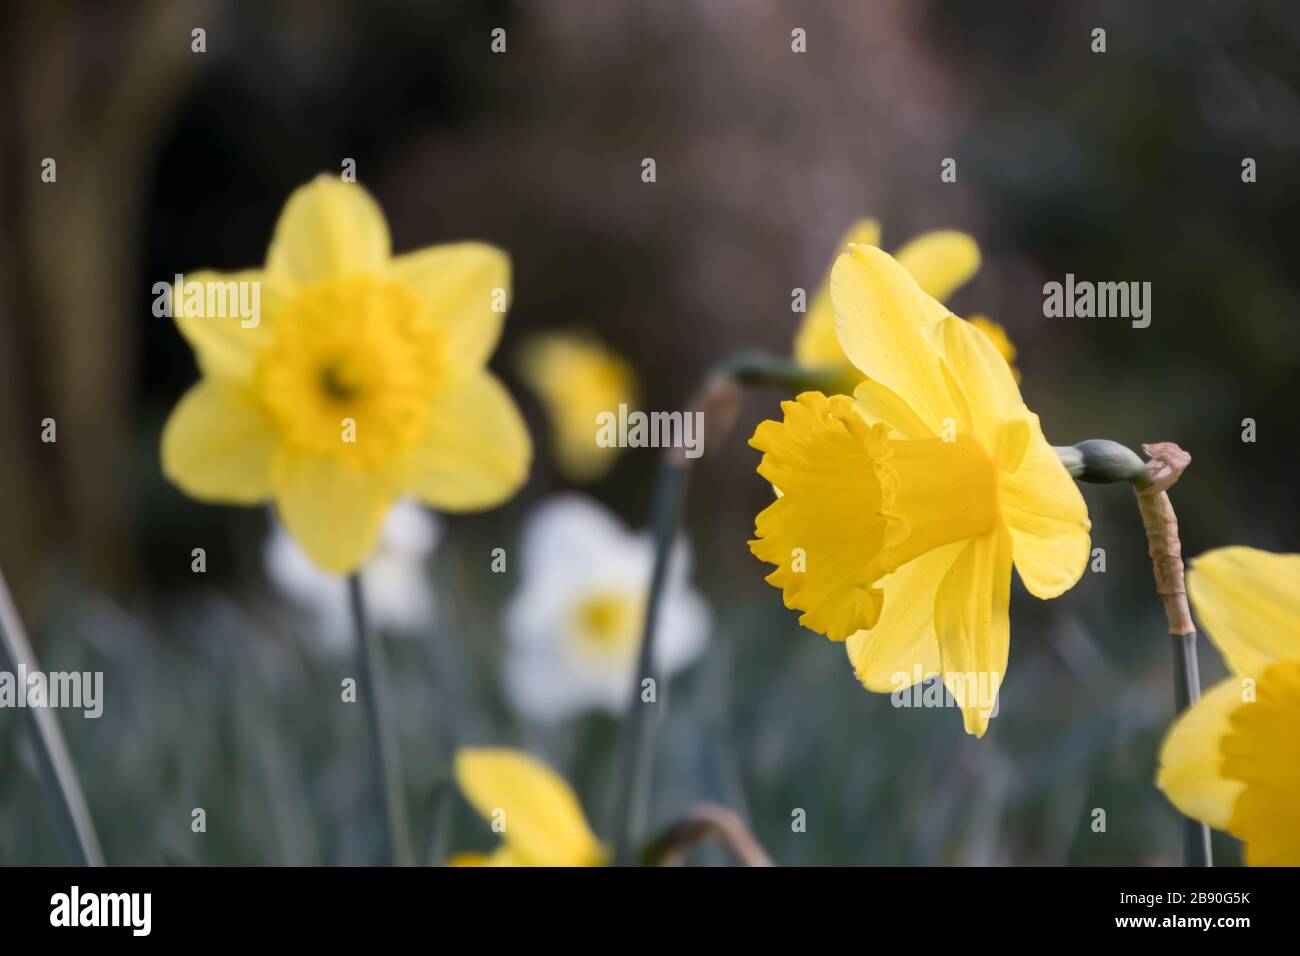 Blooming yellow daffodil flower in sunlight with bokeh background. Botanical name is narcissus. Royalty free stock photo. Stock Photo